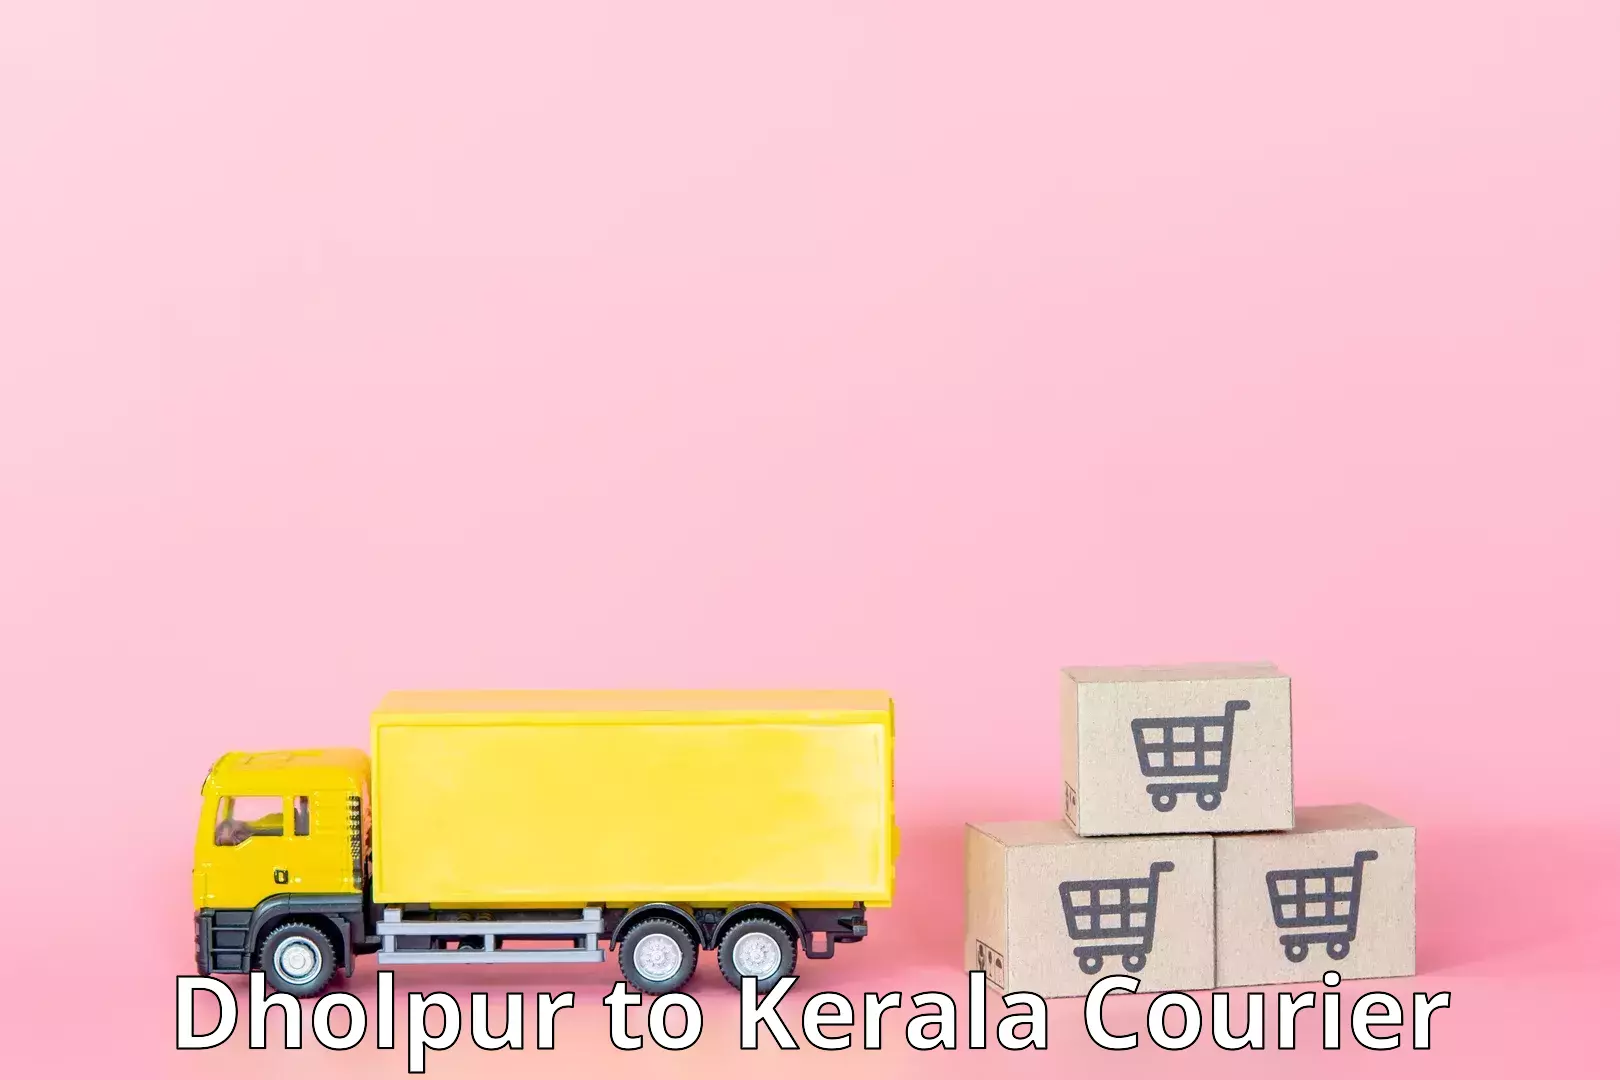 Courier service booking Dholpur to Kalpetta